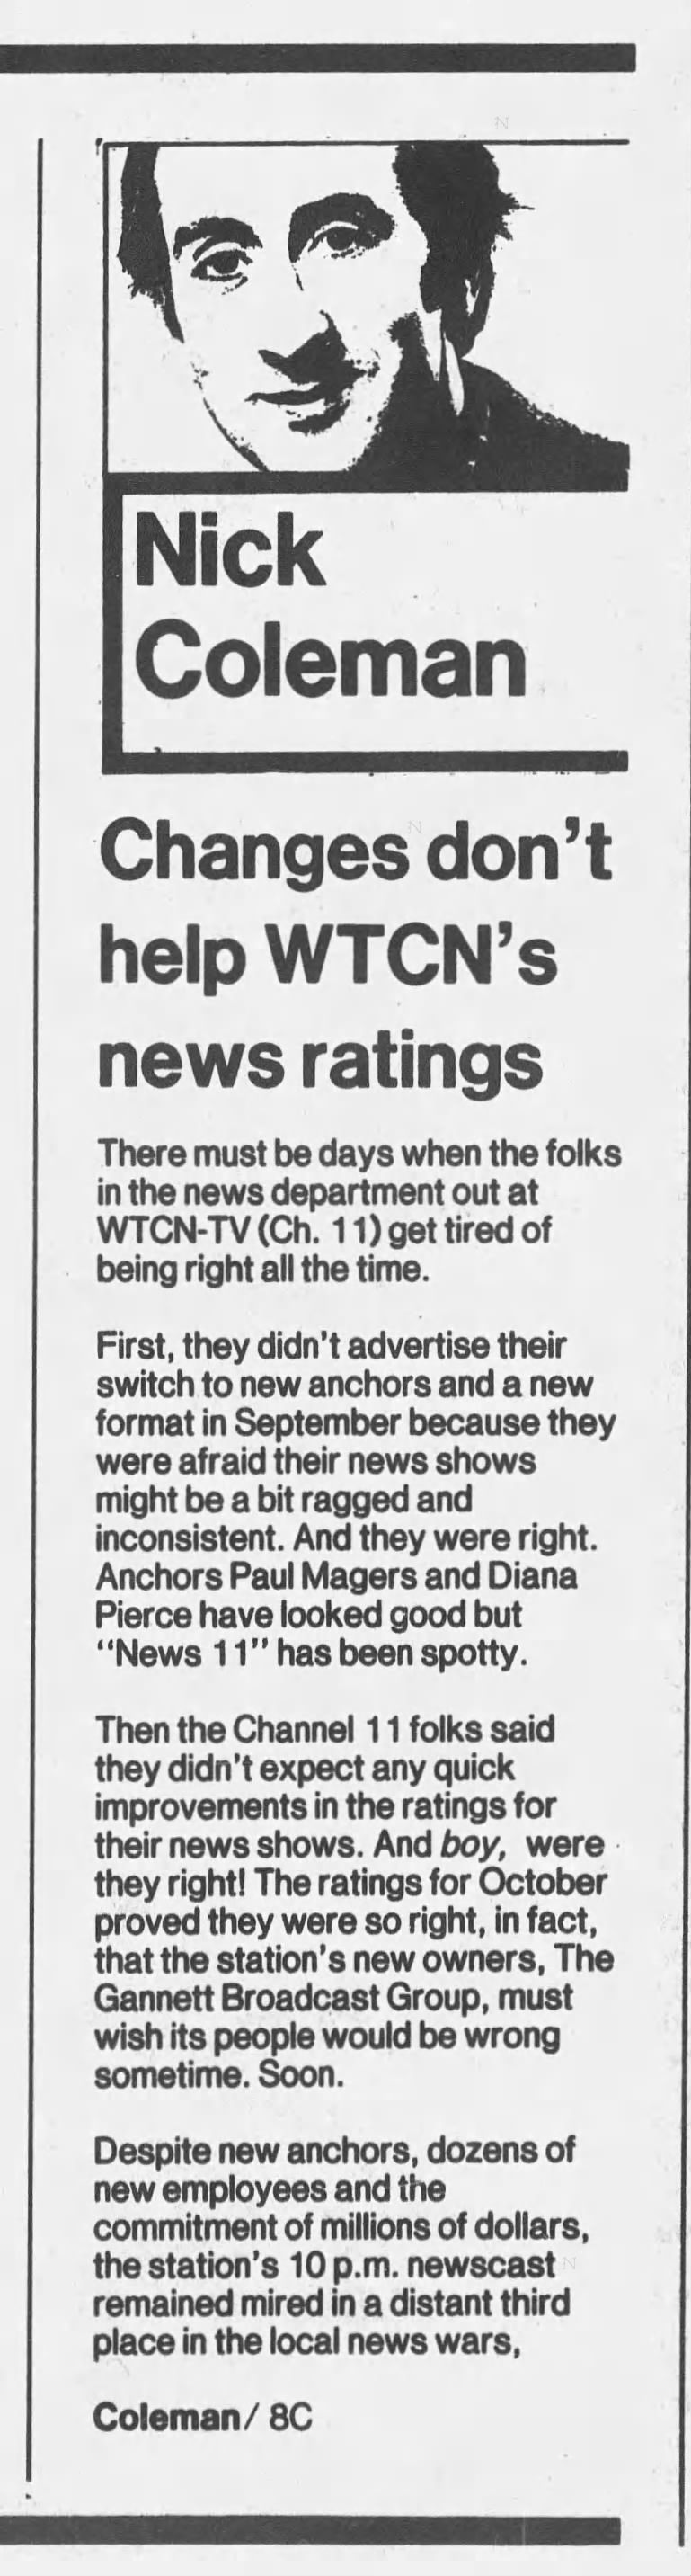 Changes don't help WTCN's news ratings